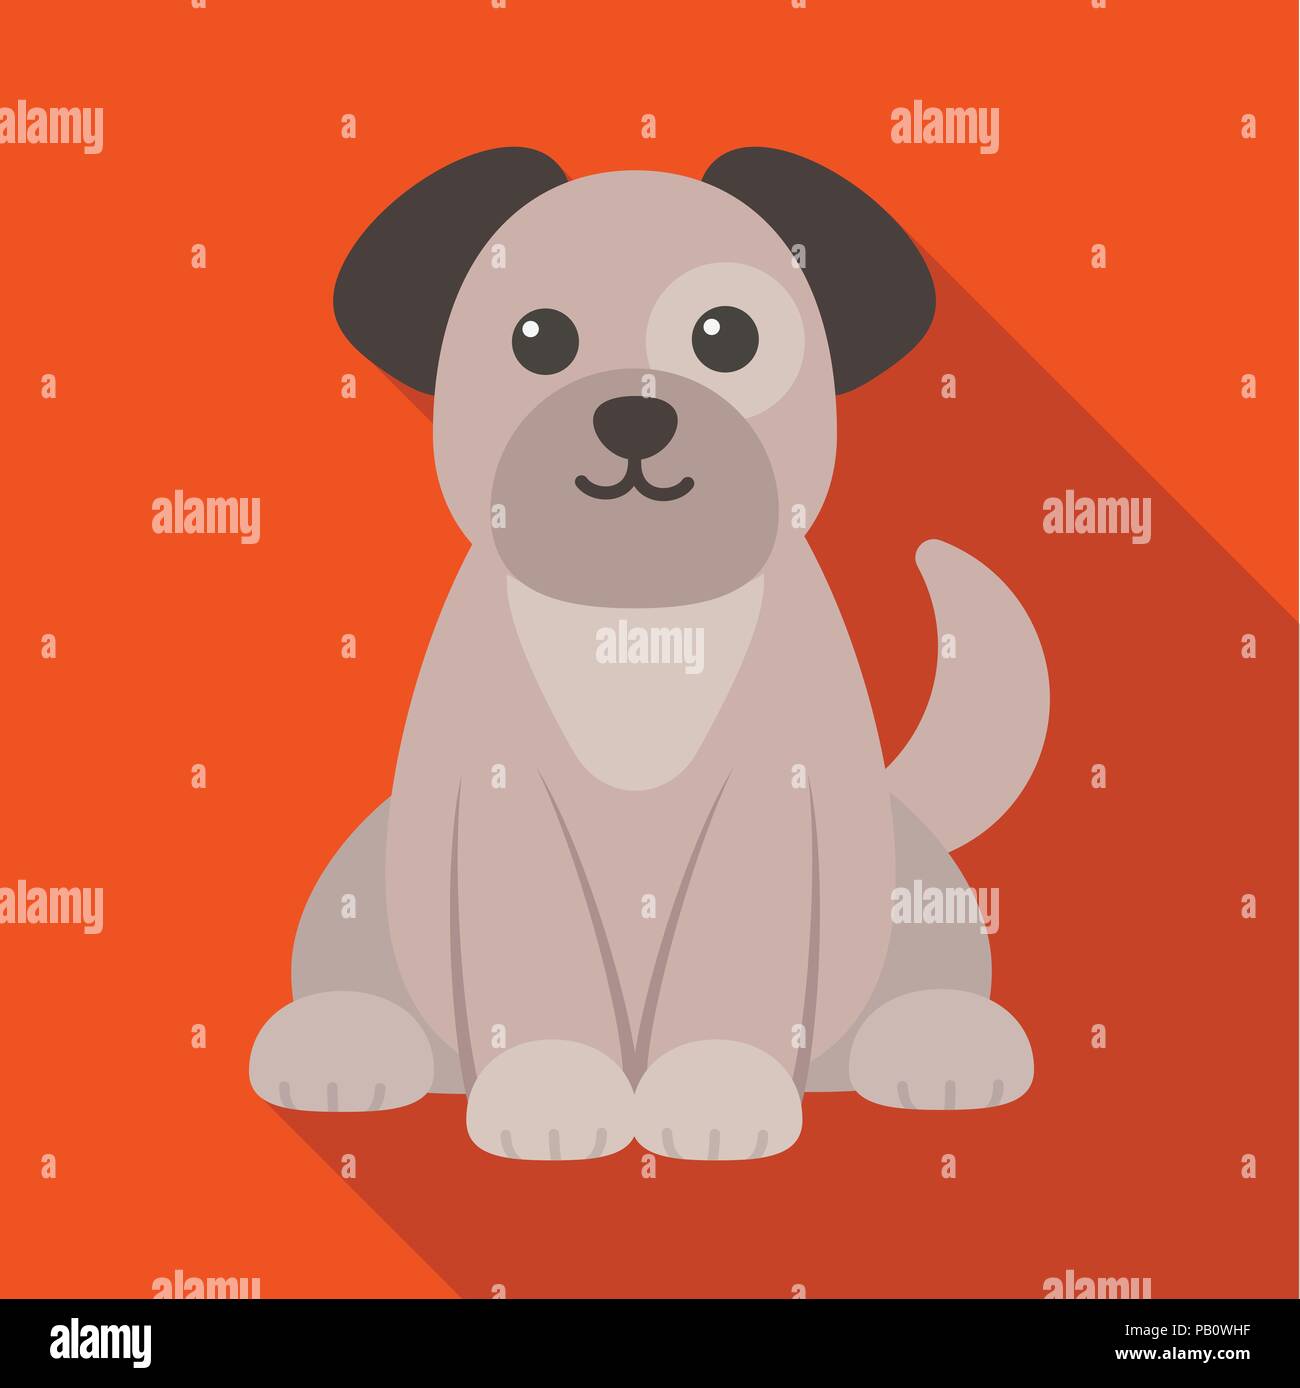 animal,app,art,background,breed,circle,claws,clip,cute,design,dog ,doggy,domestic,element,flat,frame,friend,graphic,gray,head,icon,illustration,logo,mongrel,nose,paw, pet,print,puppy,round,shape,sign,smile,symbol,tail,vector,vet,walk,wildlife,  Vector ...